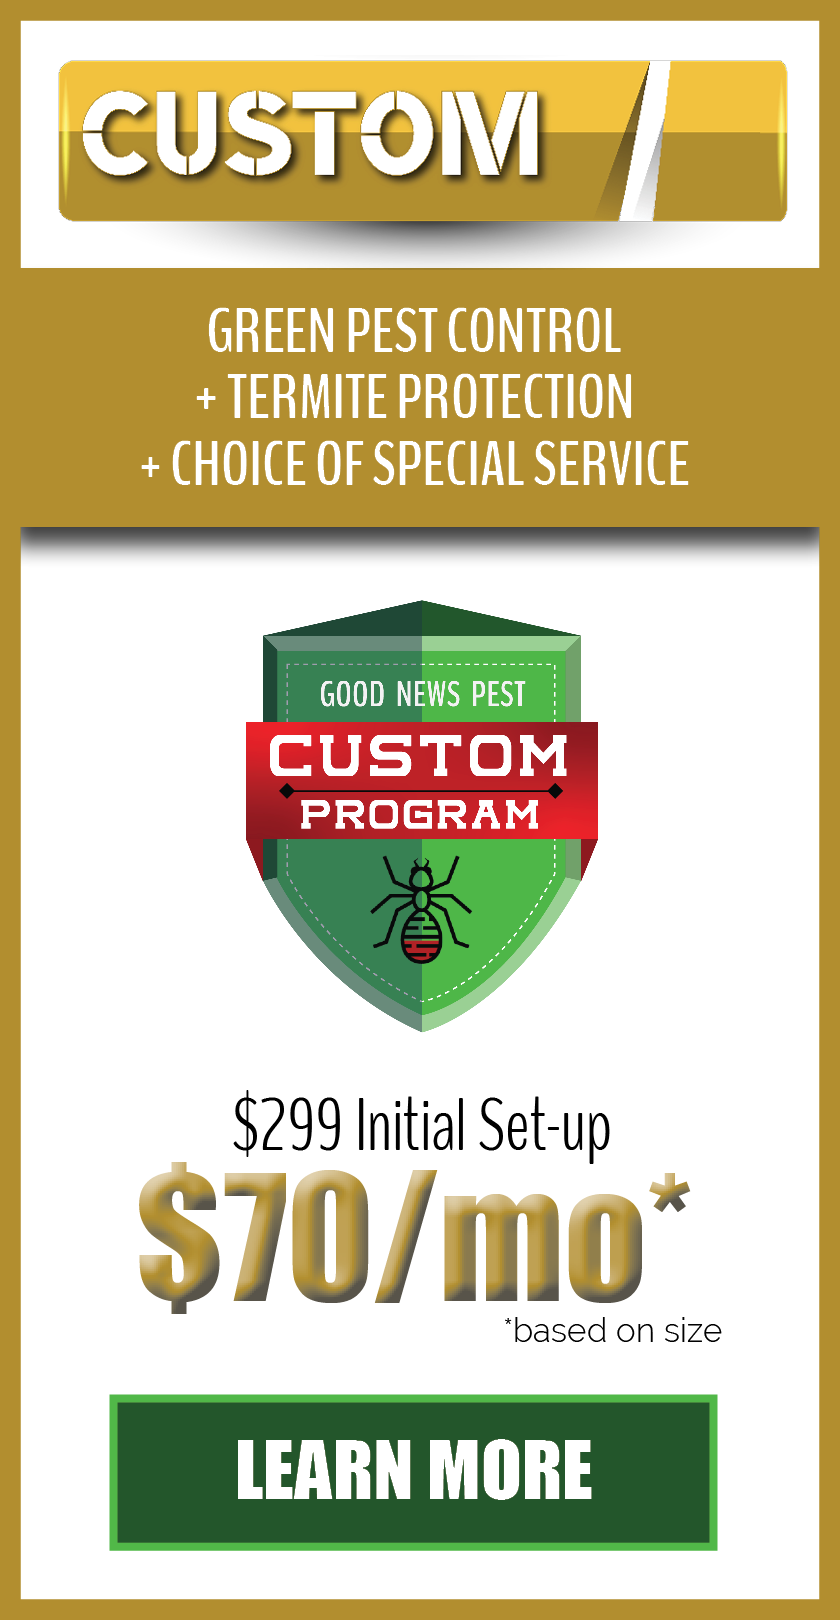 custom program, green pest control, termite protection, choice of special service